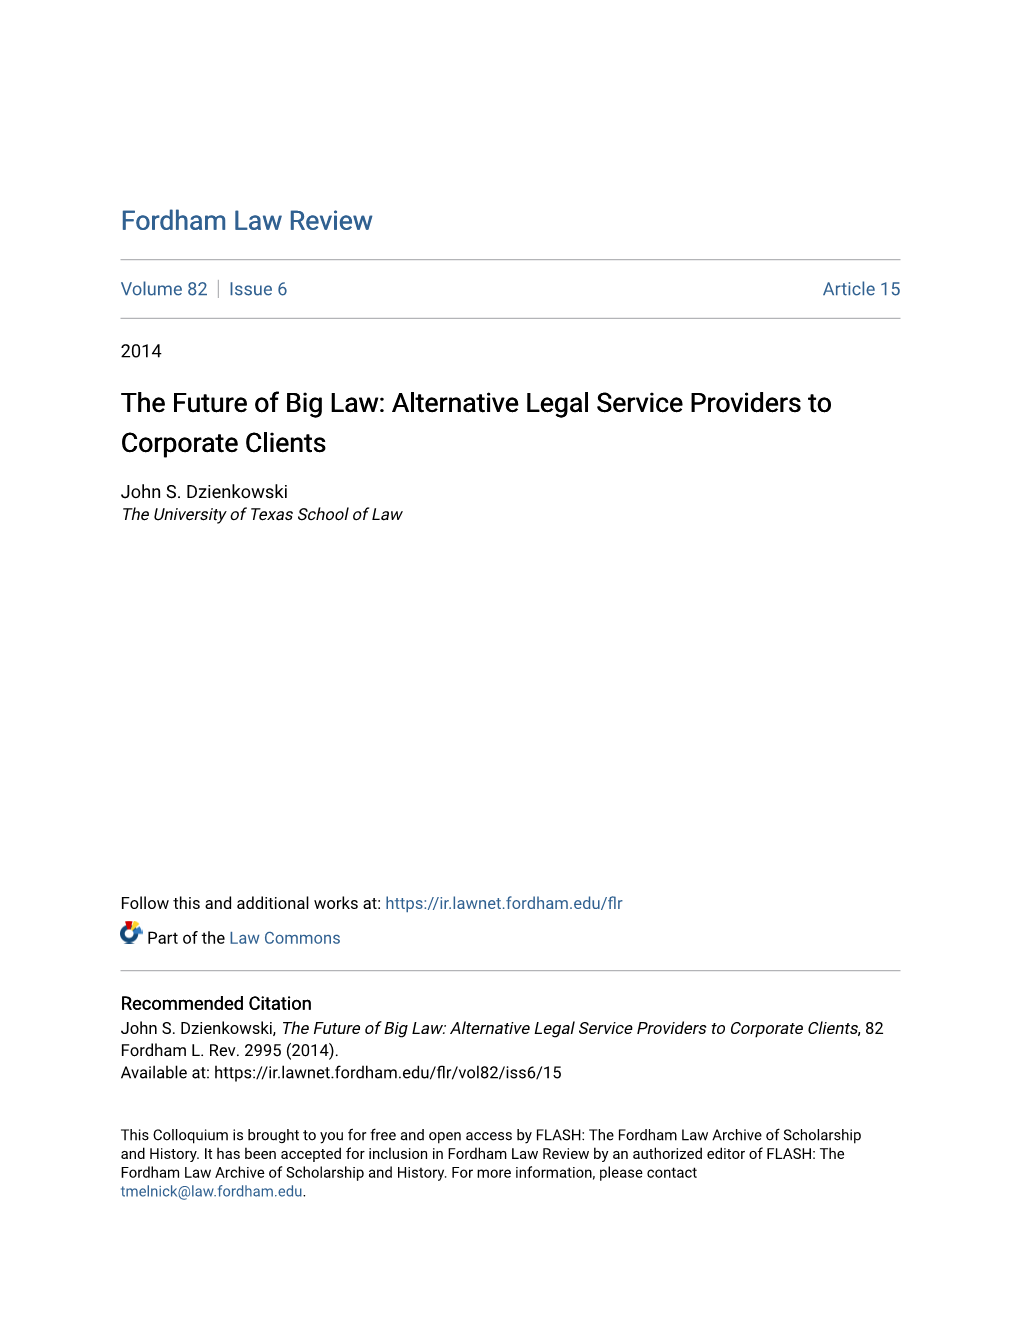 The Future of Big Law: Alternative Legal Service Providers to Corporate Clients